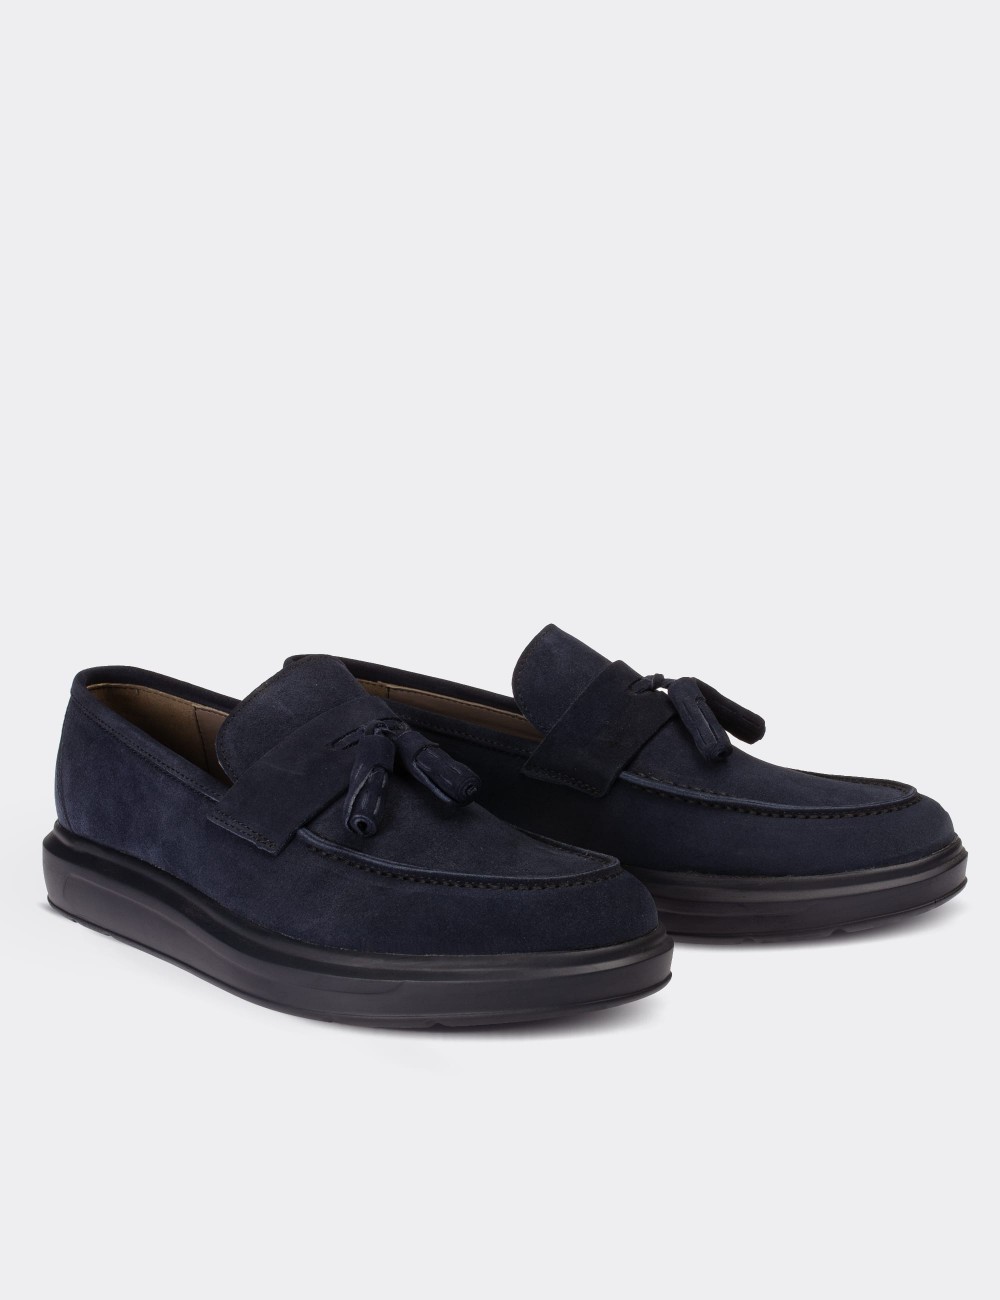 Navy Suede Leather Loafers - 01587MMVIP04